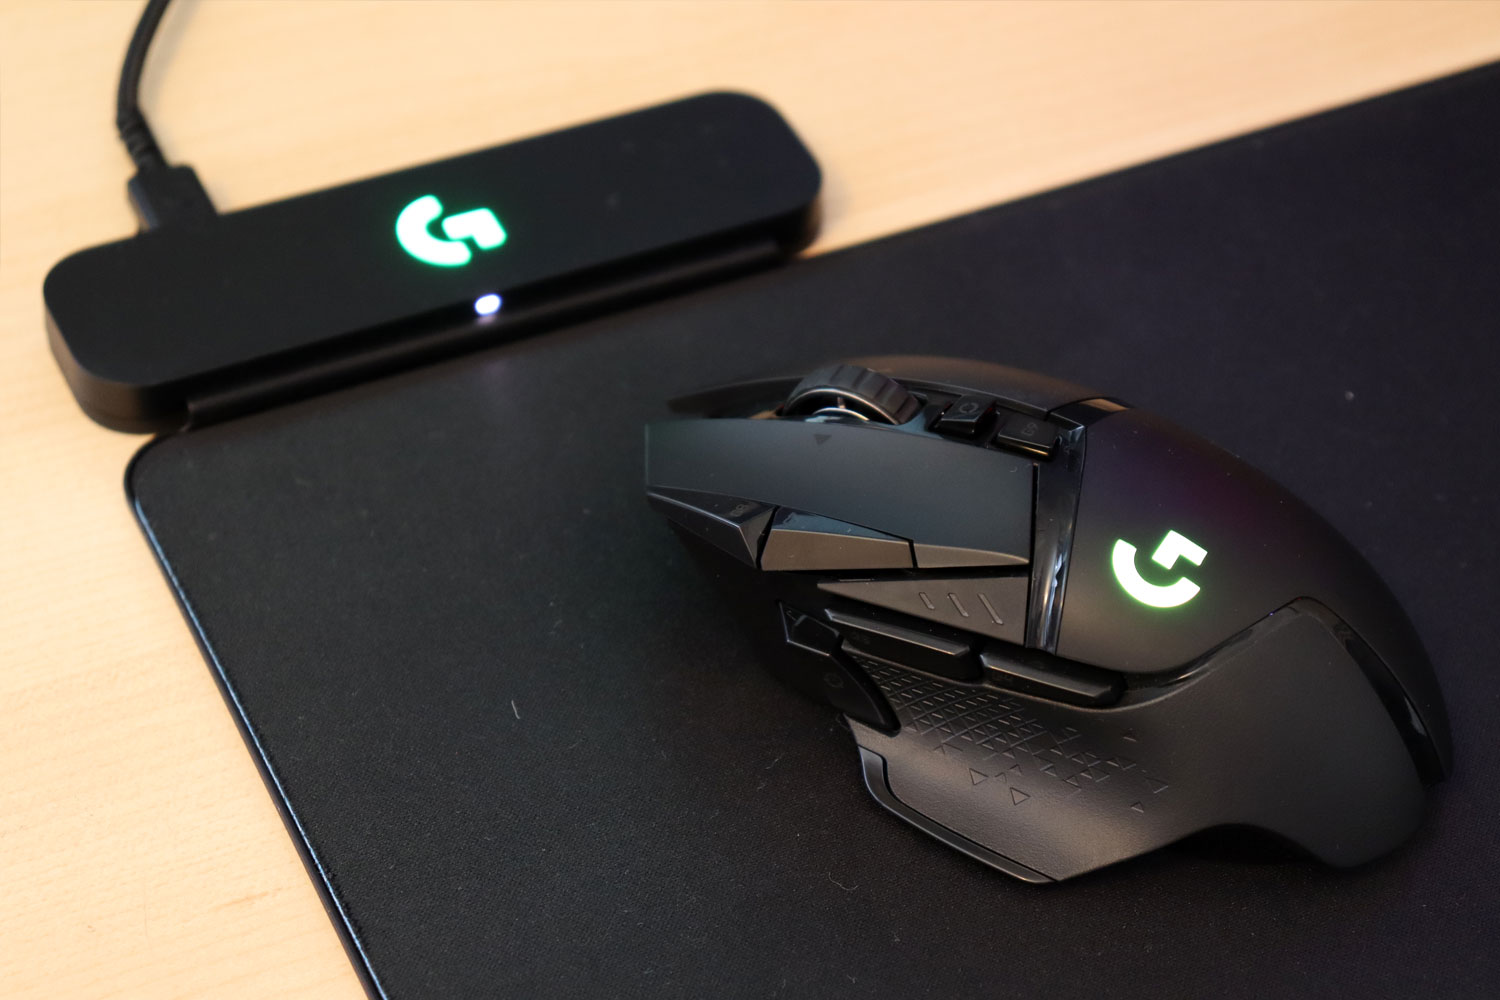 Logitech G502 Lightspeed Mouse Review: Who Needs Wires?